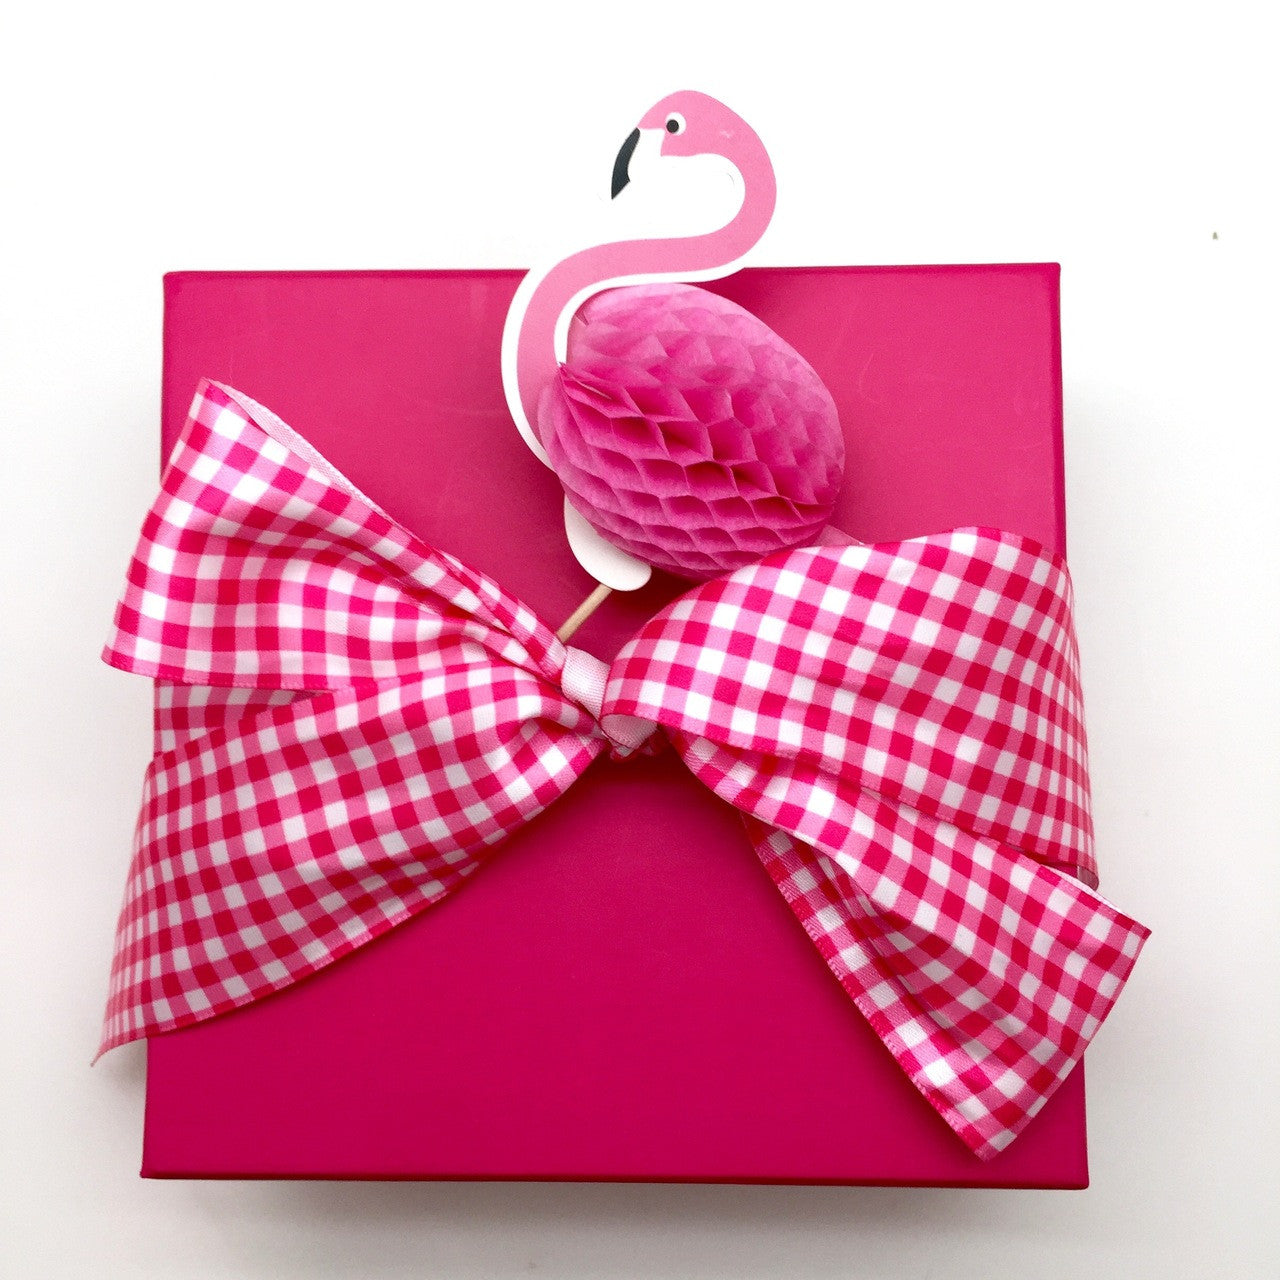 Our 1.5"  pink gingham ribbon ties a handsome bow!  Adding a little country flair to a flamingo party is lots of fun!